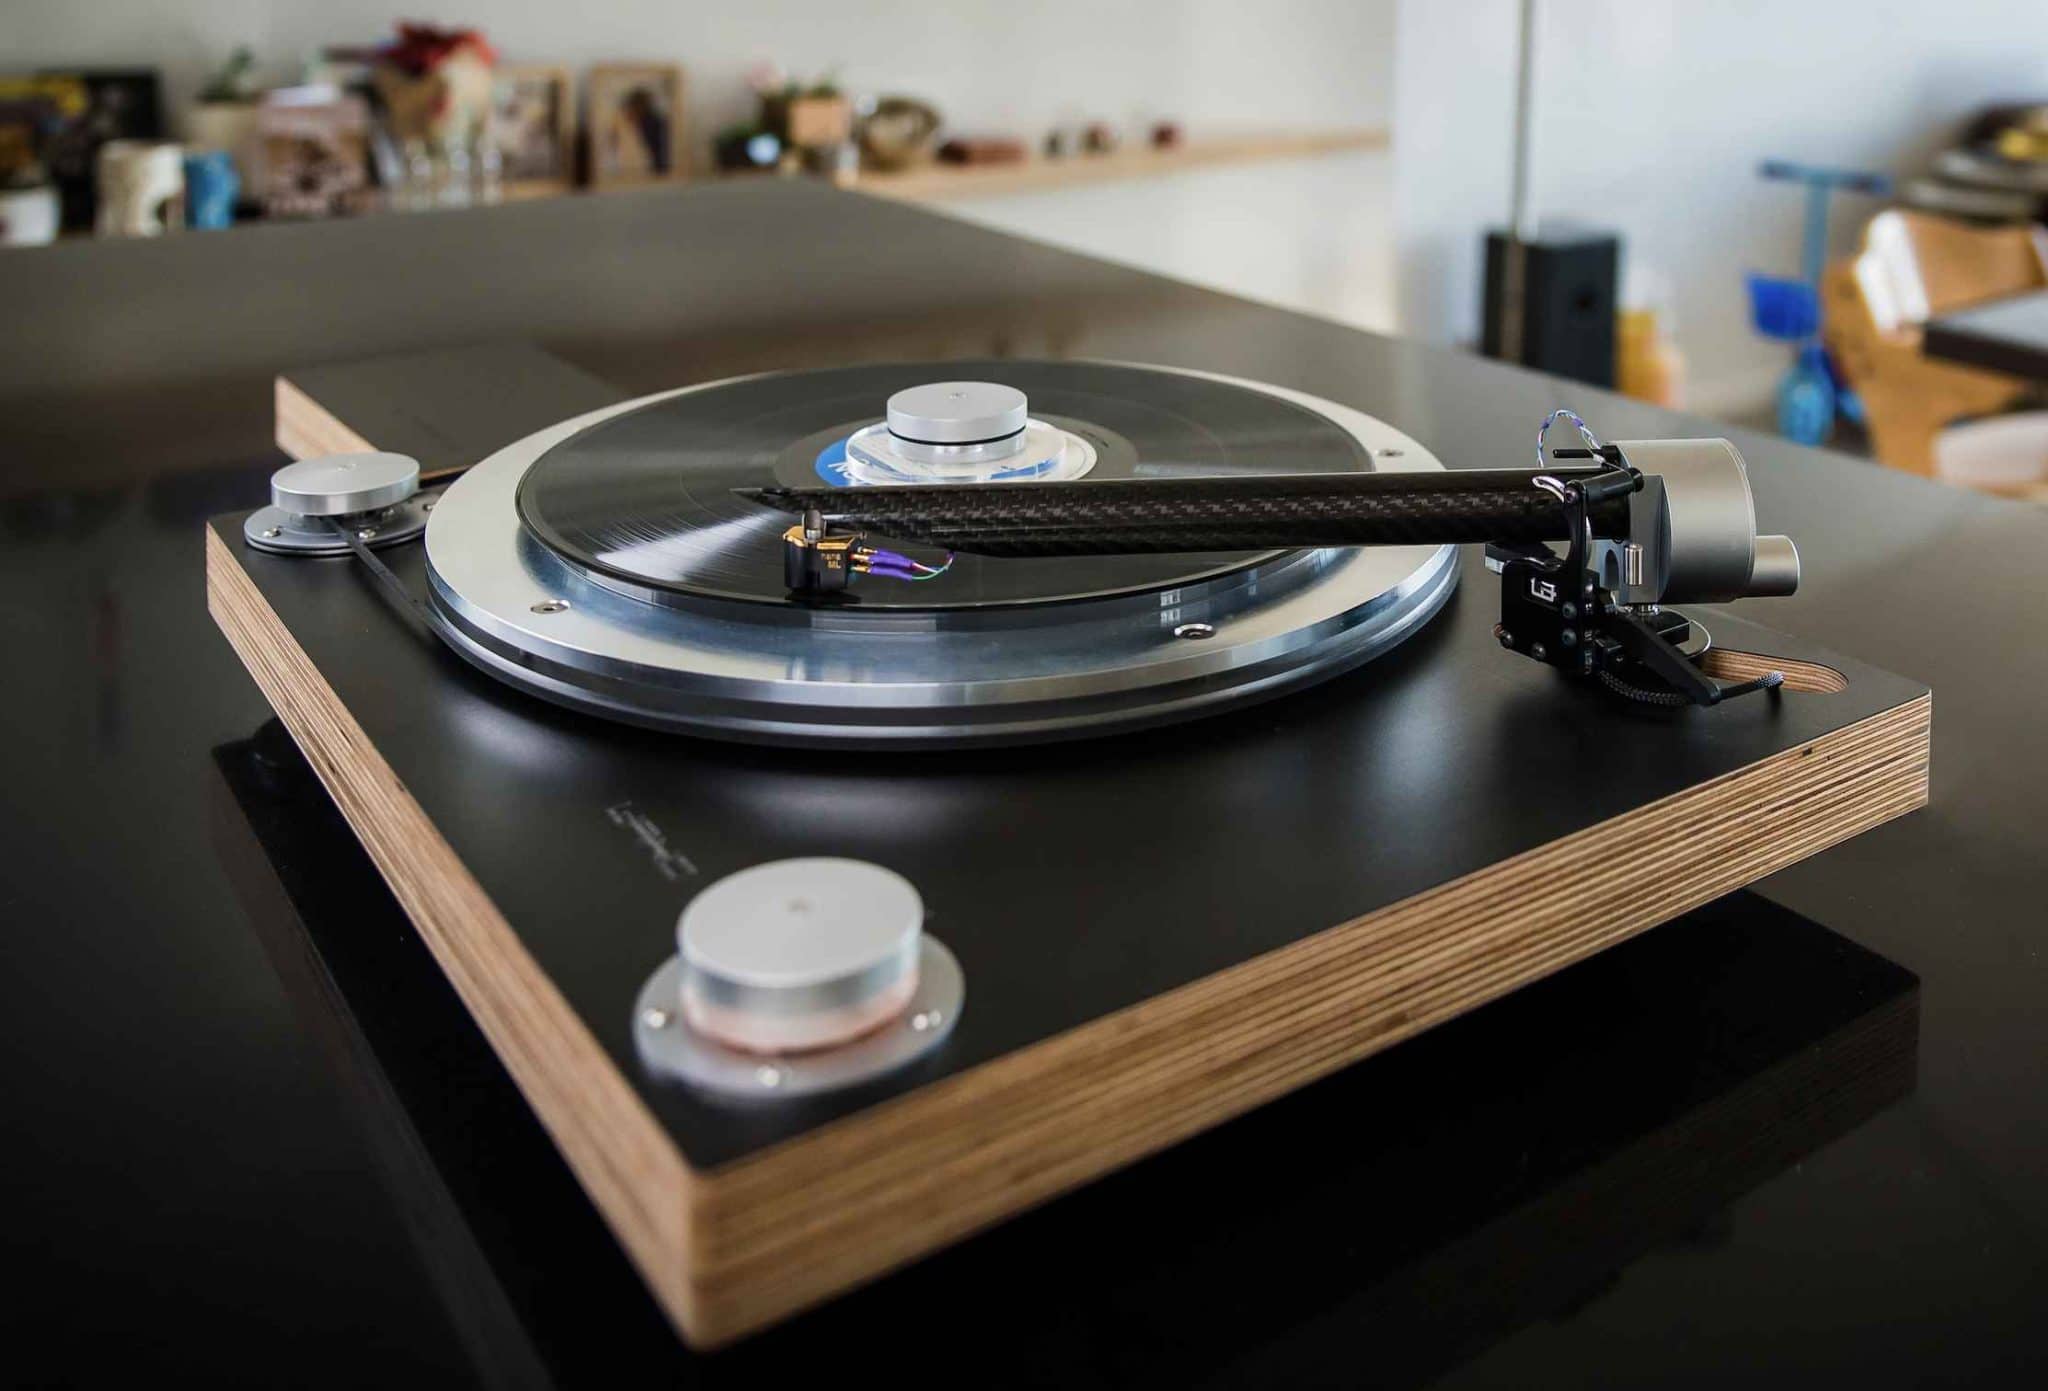 THE WAND 14-4 TURNTABLE